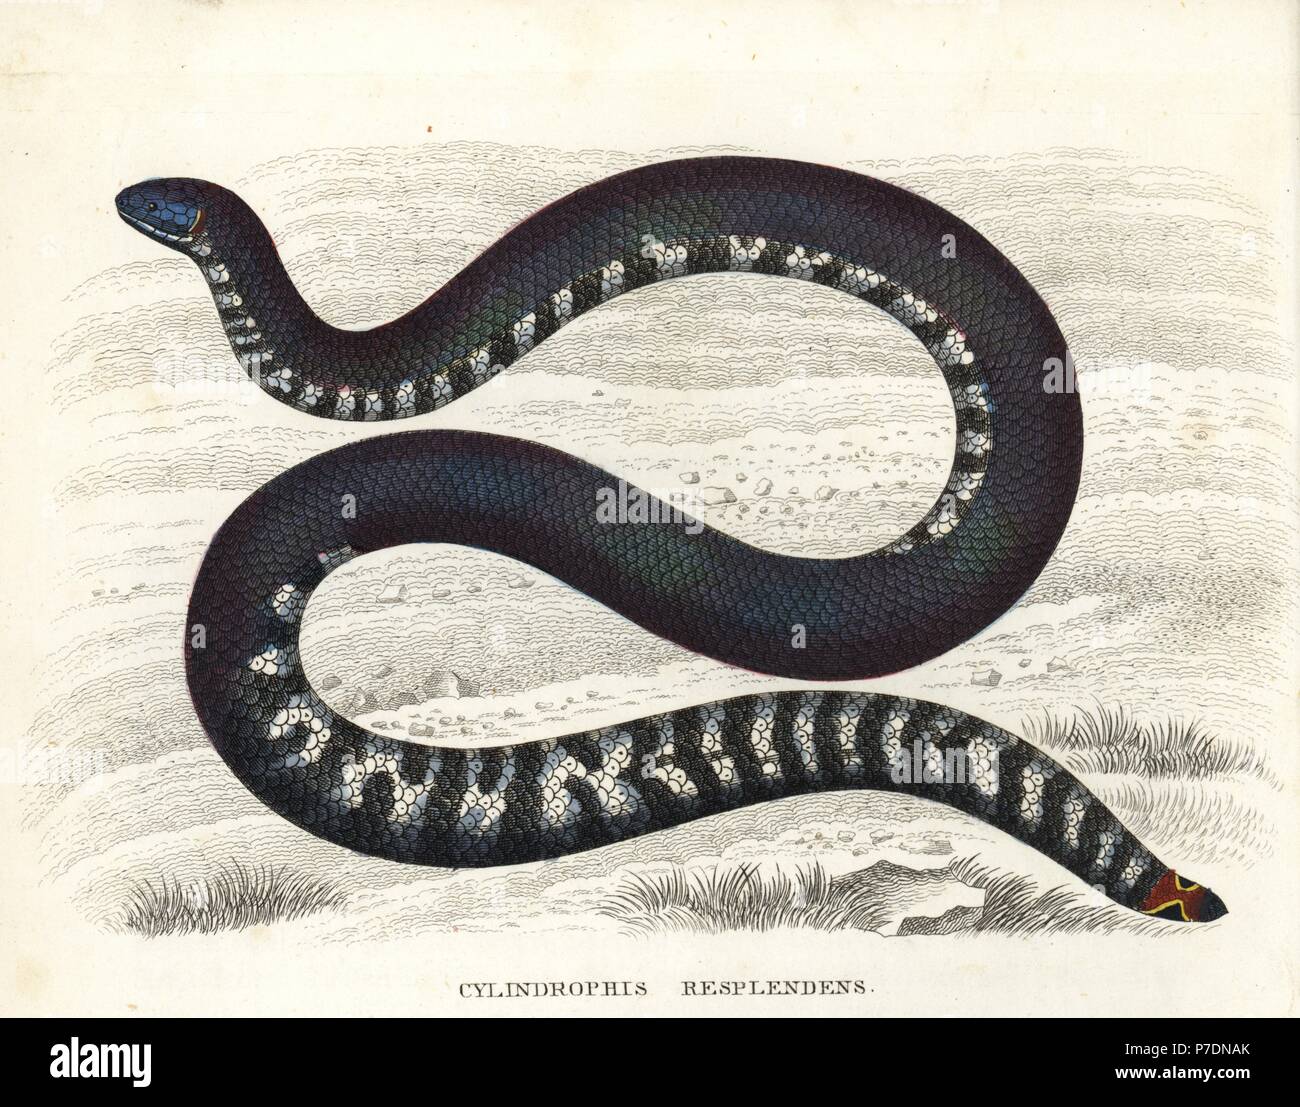 https://c8.alamy.com/comp/P7DNAK/red-tailed-pipe-snake-cylindrophis-ruffus-cylindrophis-resplendens-handcoloured-lithograph-after-an-illustration-by-sandler-from-georg-friedrich-treitschkes-gallery-of-natural-history-naturhistorischer-bildersaal-des-thierreiches-liepzig-1842-P7DNAK.jpg